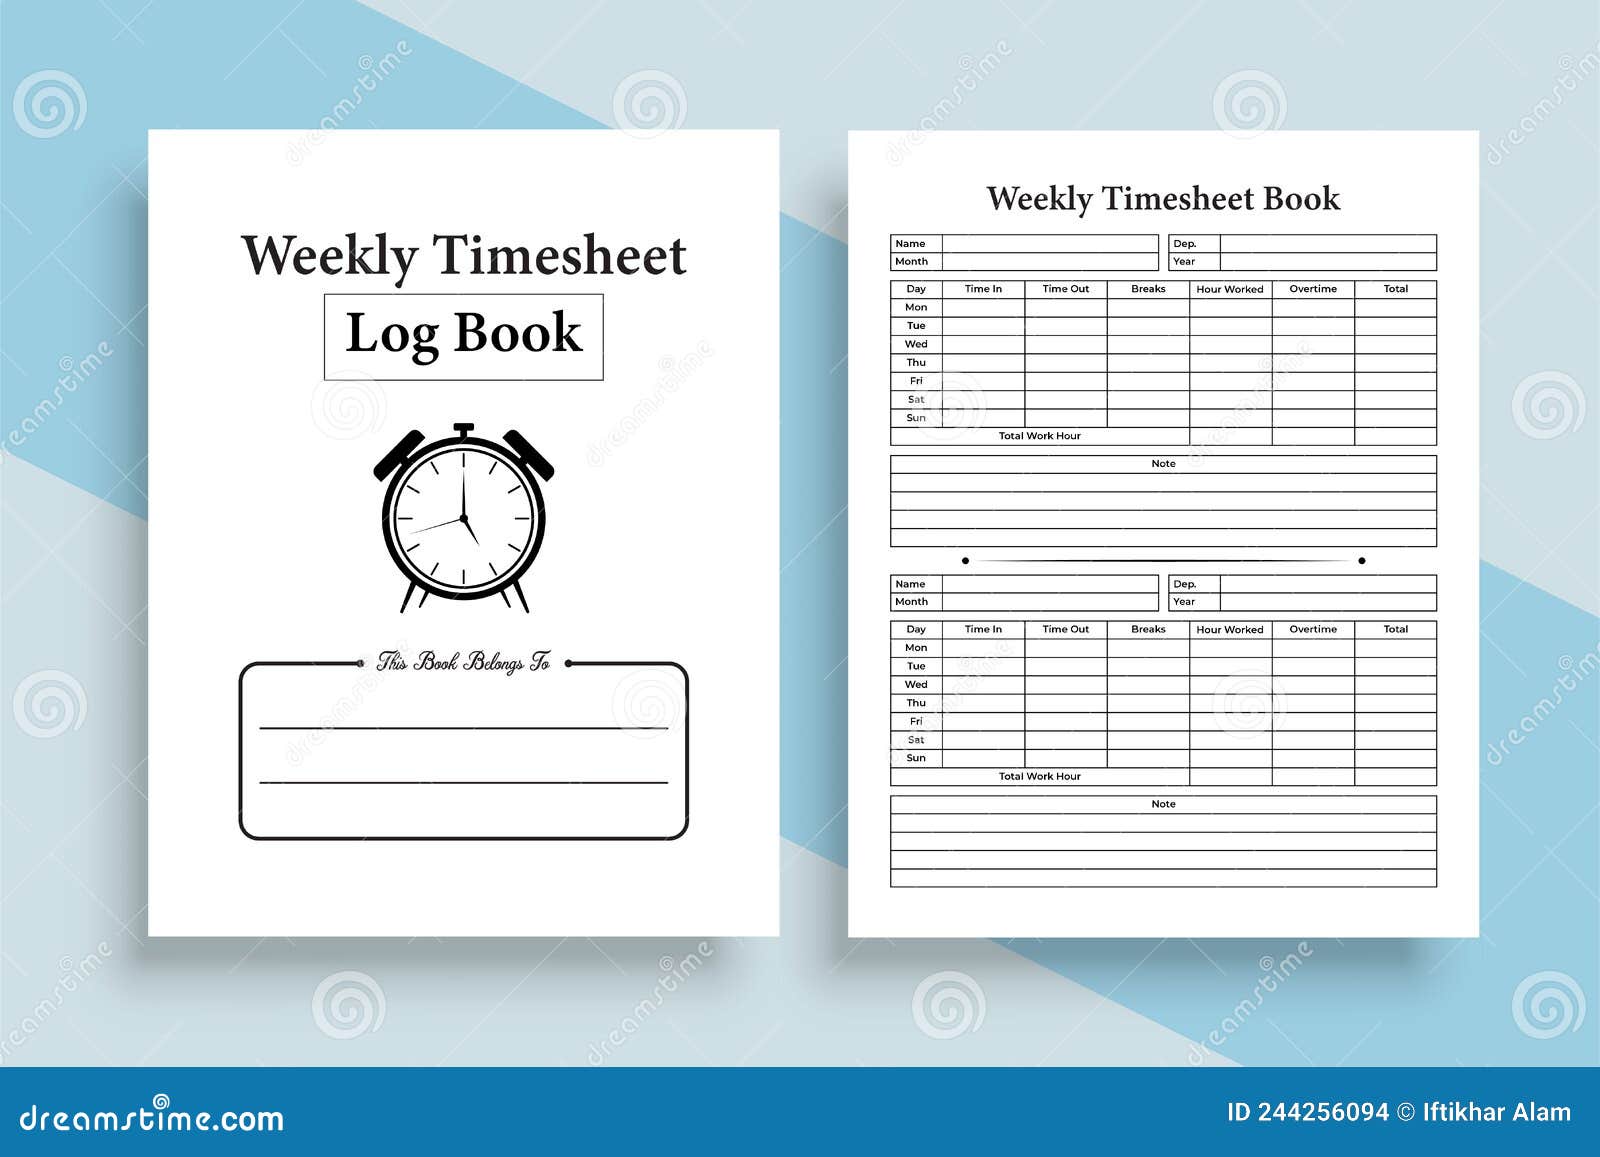 weekly timesheet kdp interior notebook. office employee incoming and outgoing time tracker journal template. kdp interior log book